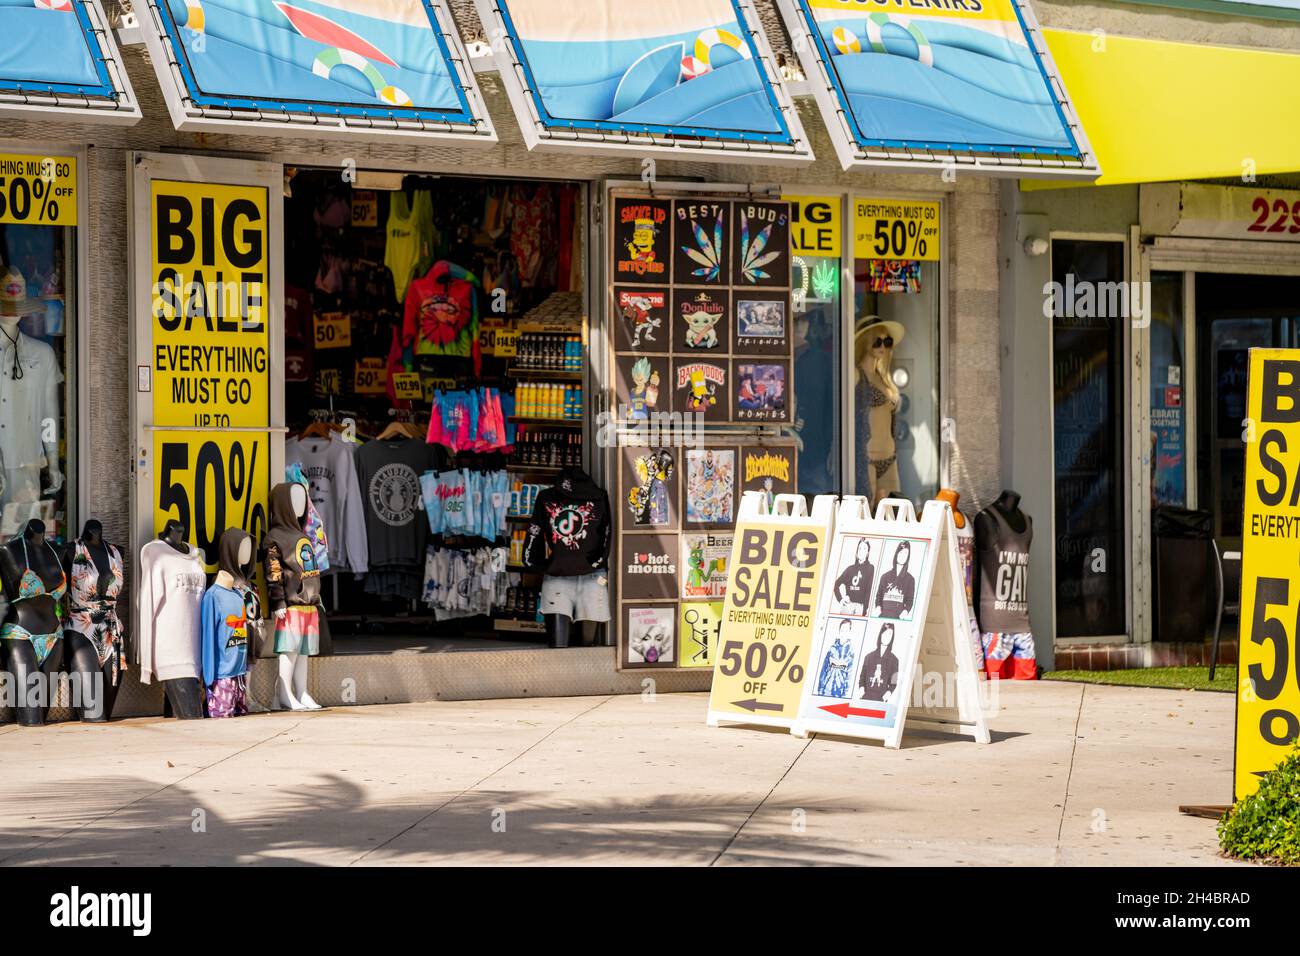 Fort Lauderdale, FL, USA - October 31, 2021: Photo of a store advertising 50 percent off everything must go clerance sale Stock Photo